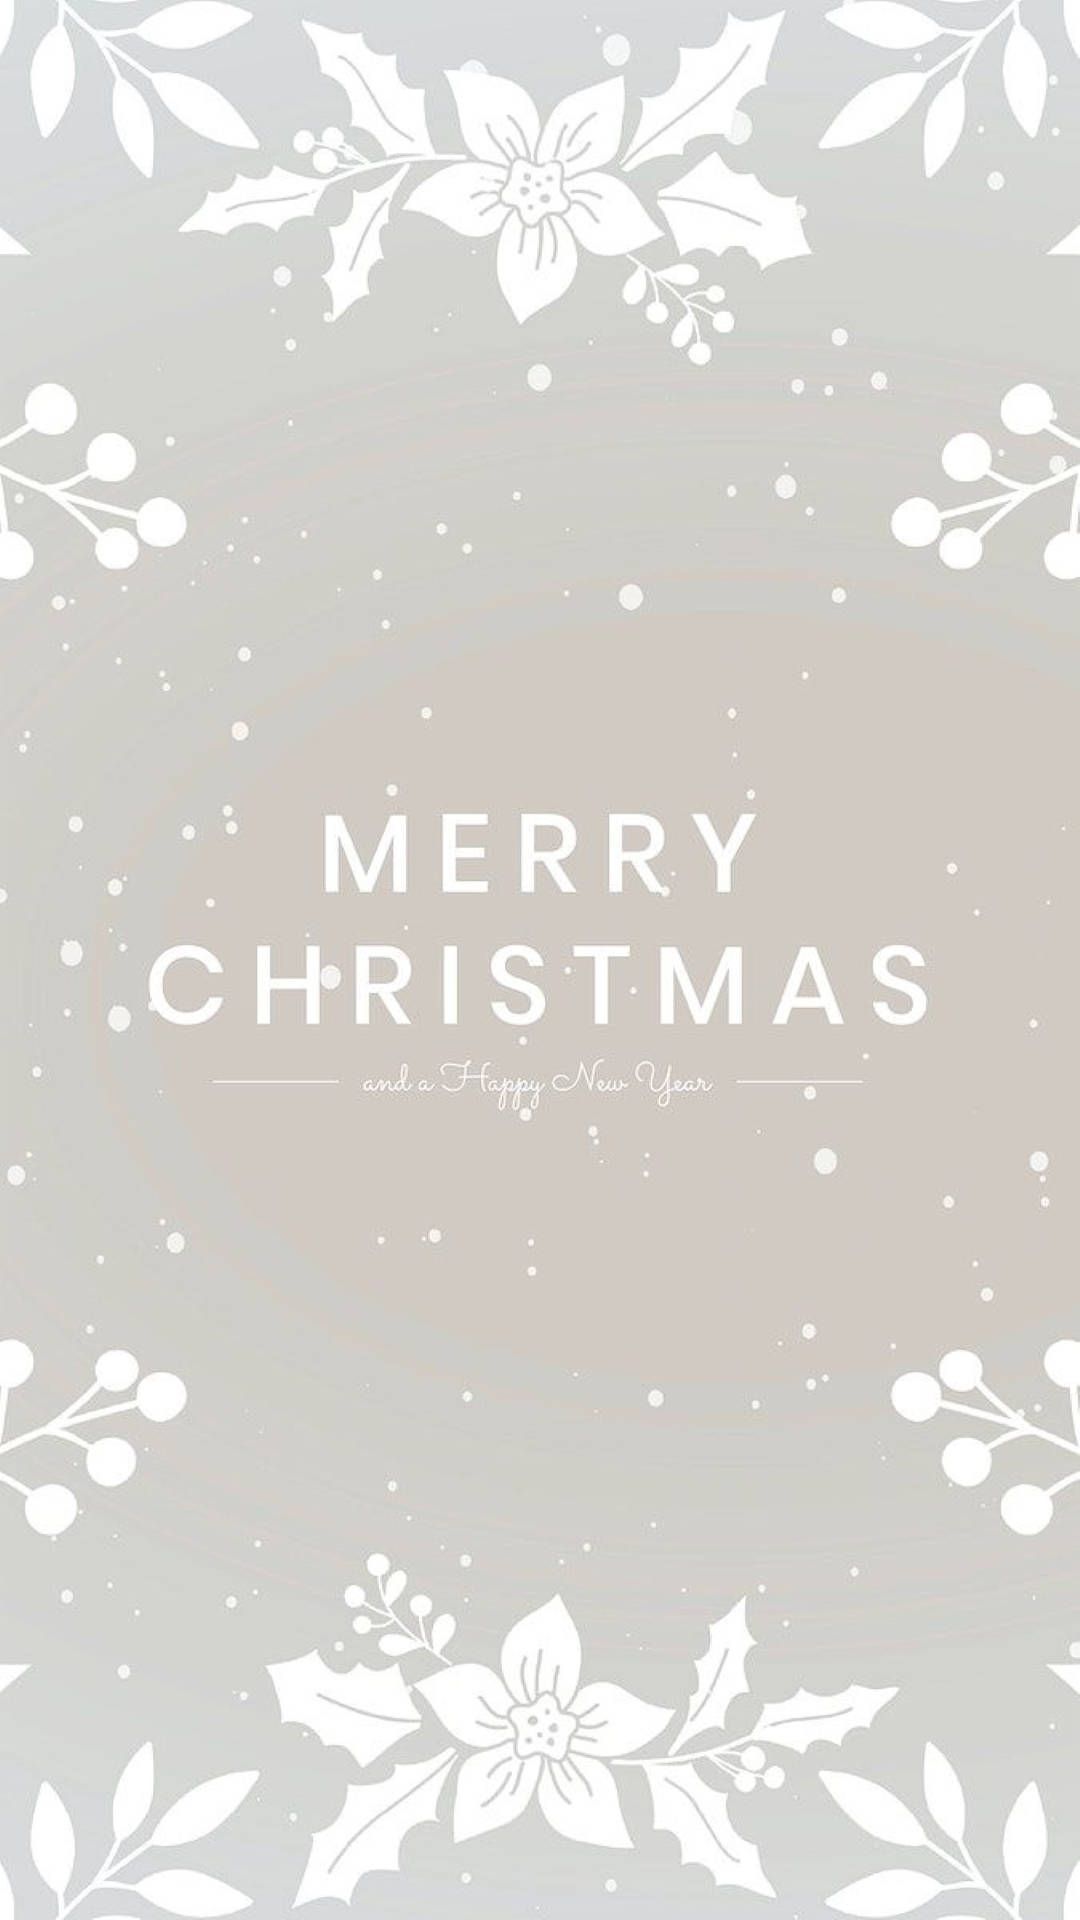 Free Christmas Aesthetic Wallpaper Downloads, Christmas Aesthetic Wallpaper for FREE